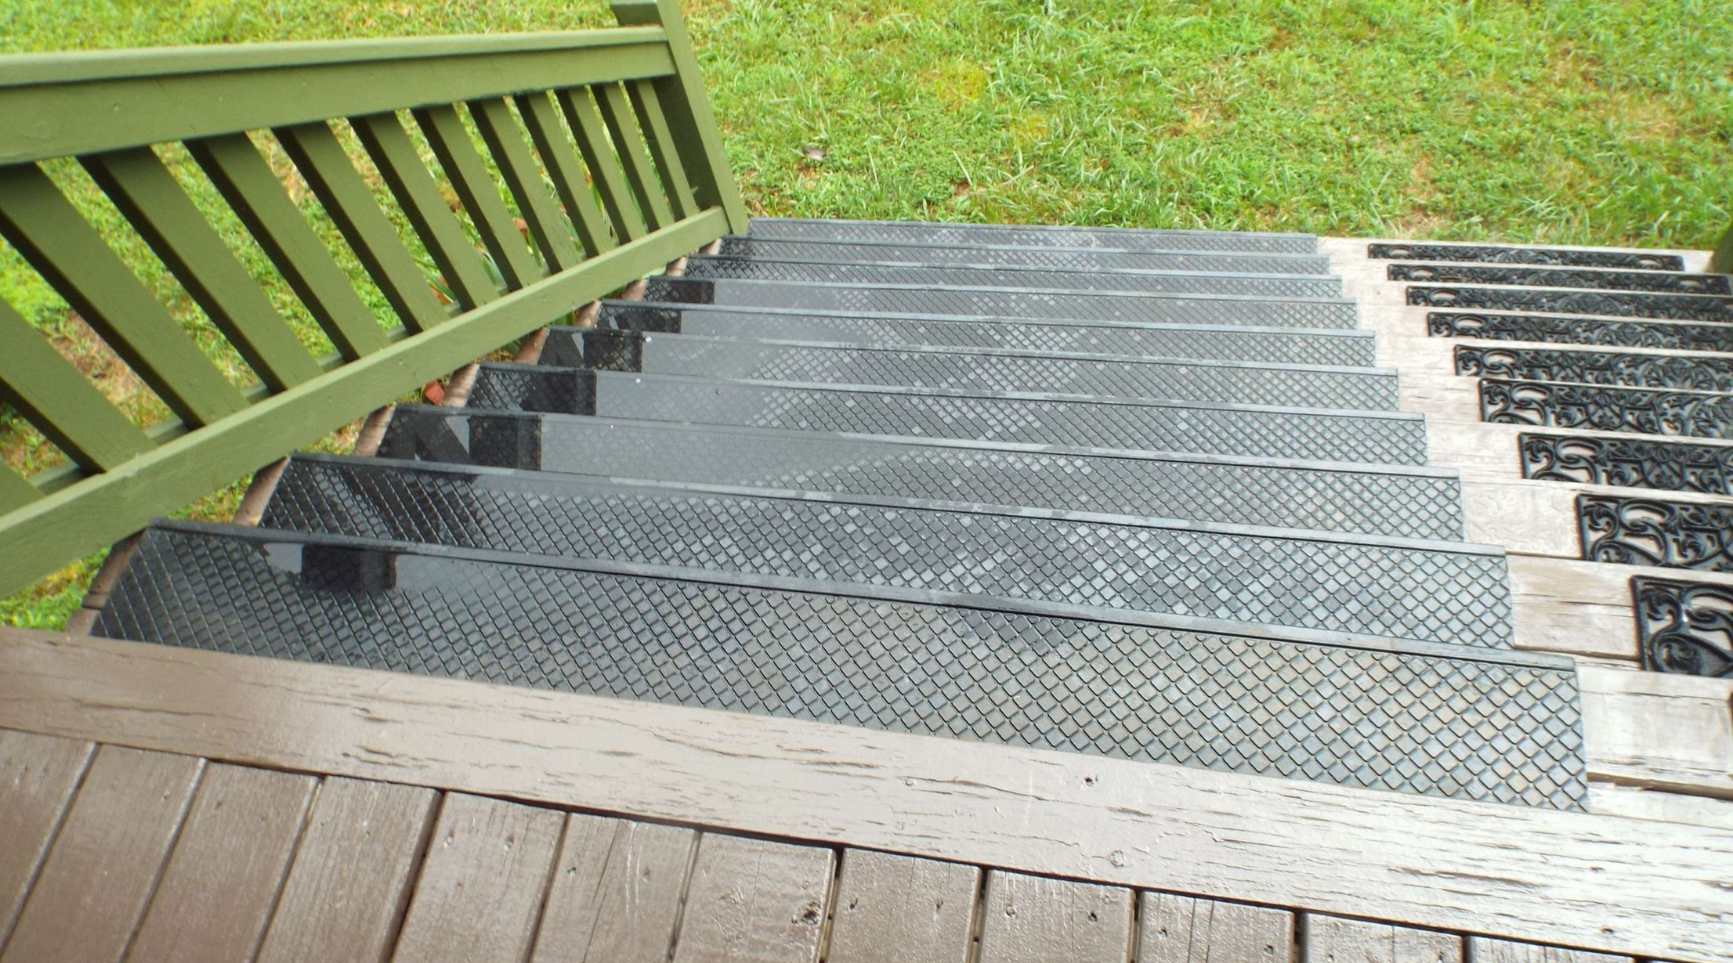 What To Put On Outdoor Wooden Stairs To Prevent Slipping